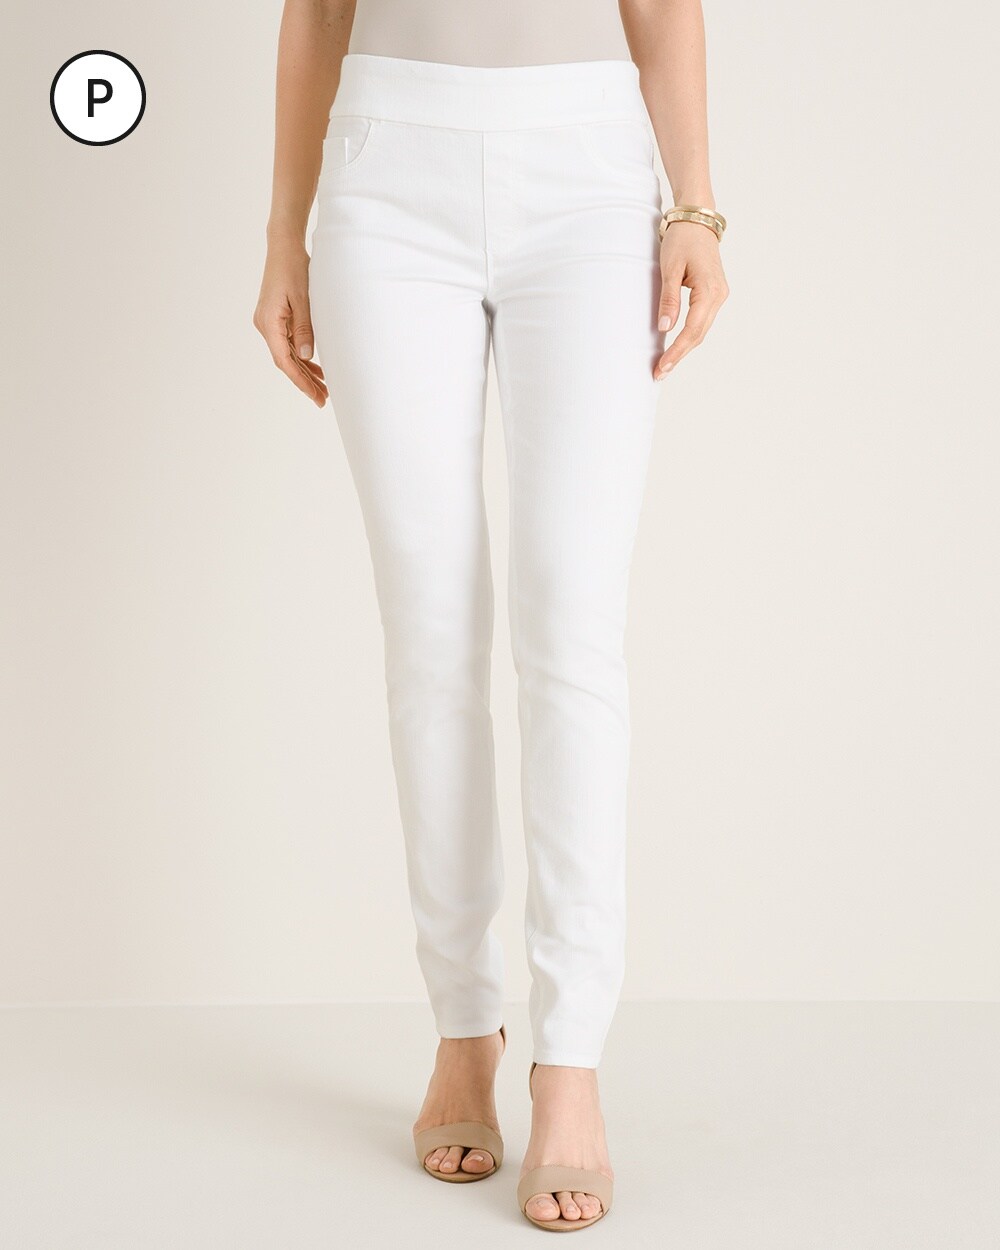 No-Stain Petite Pull-On Jeggings